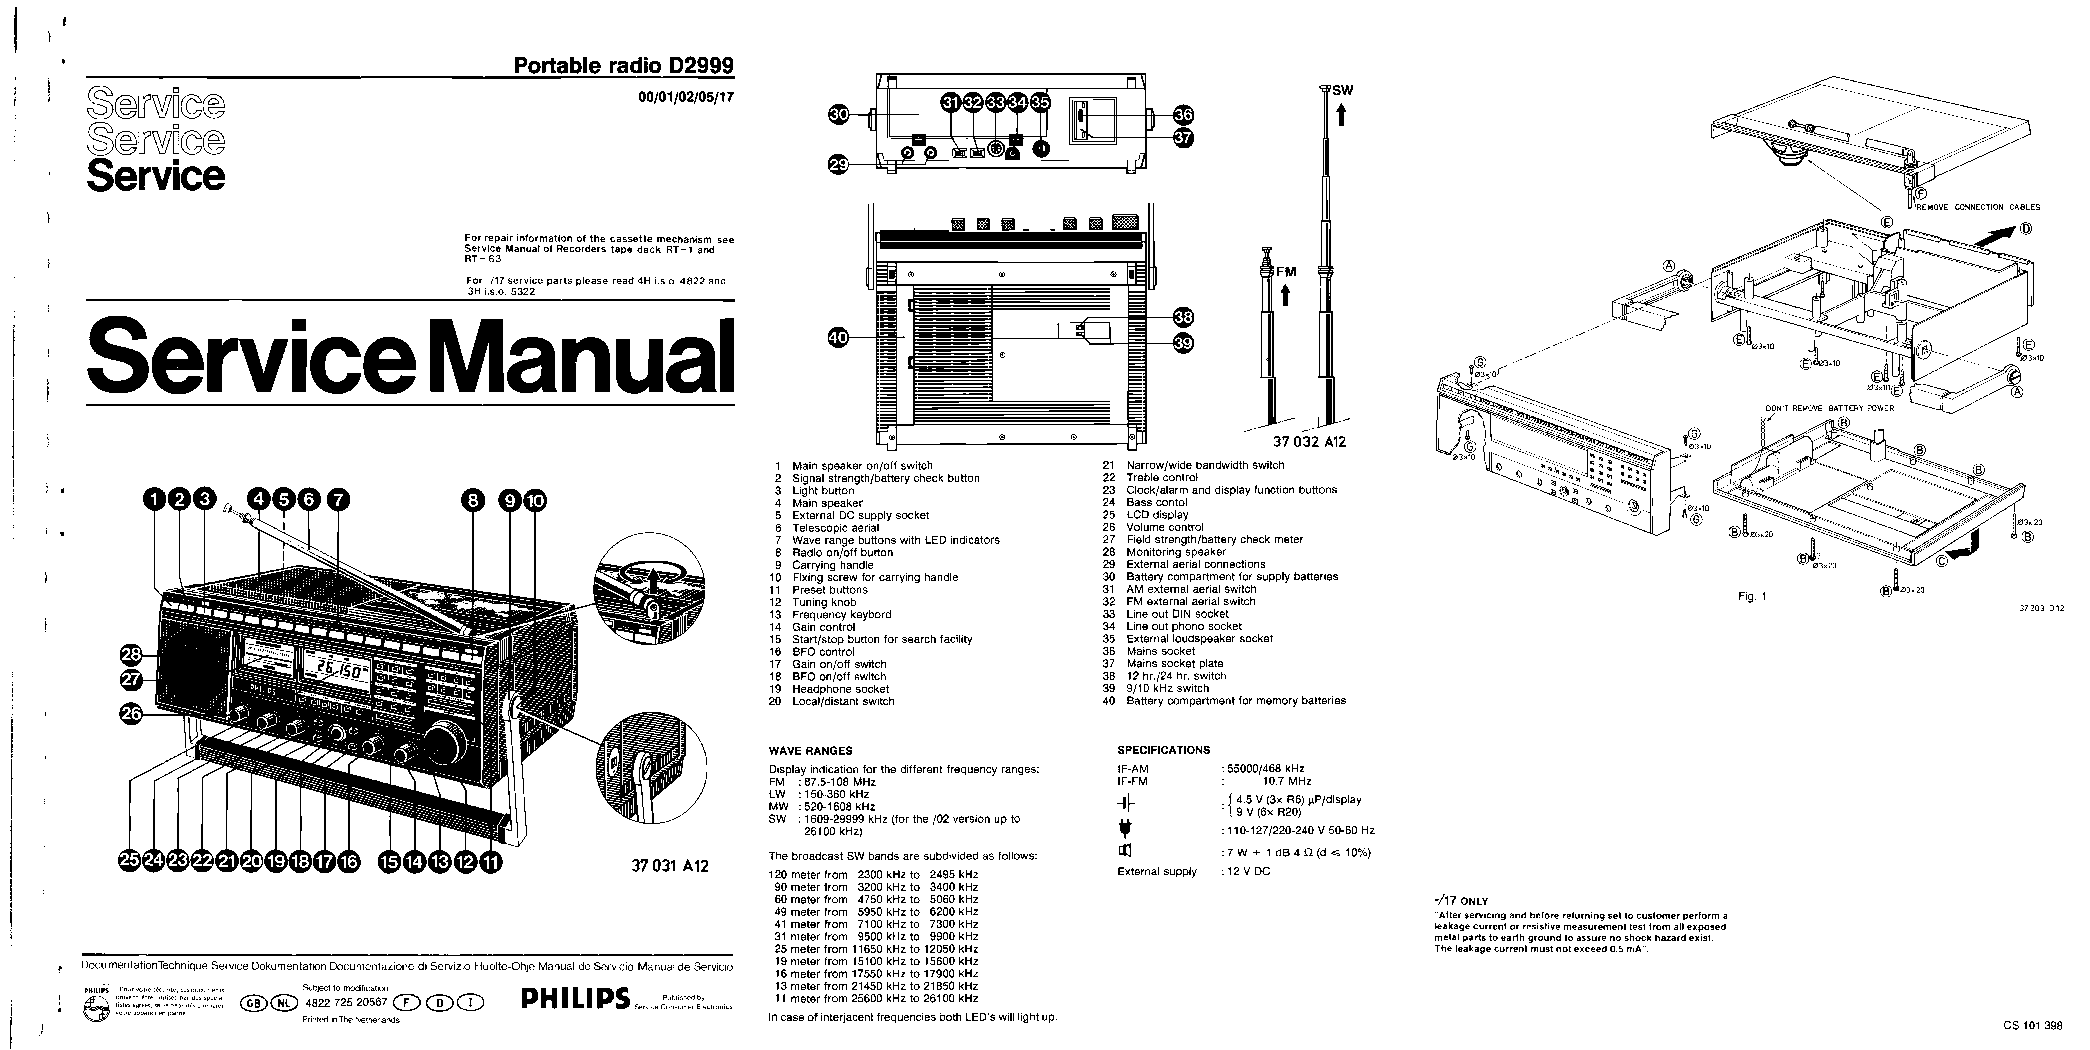 PHILIPS D2999 SM service manual (1st page)